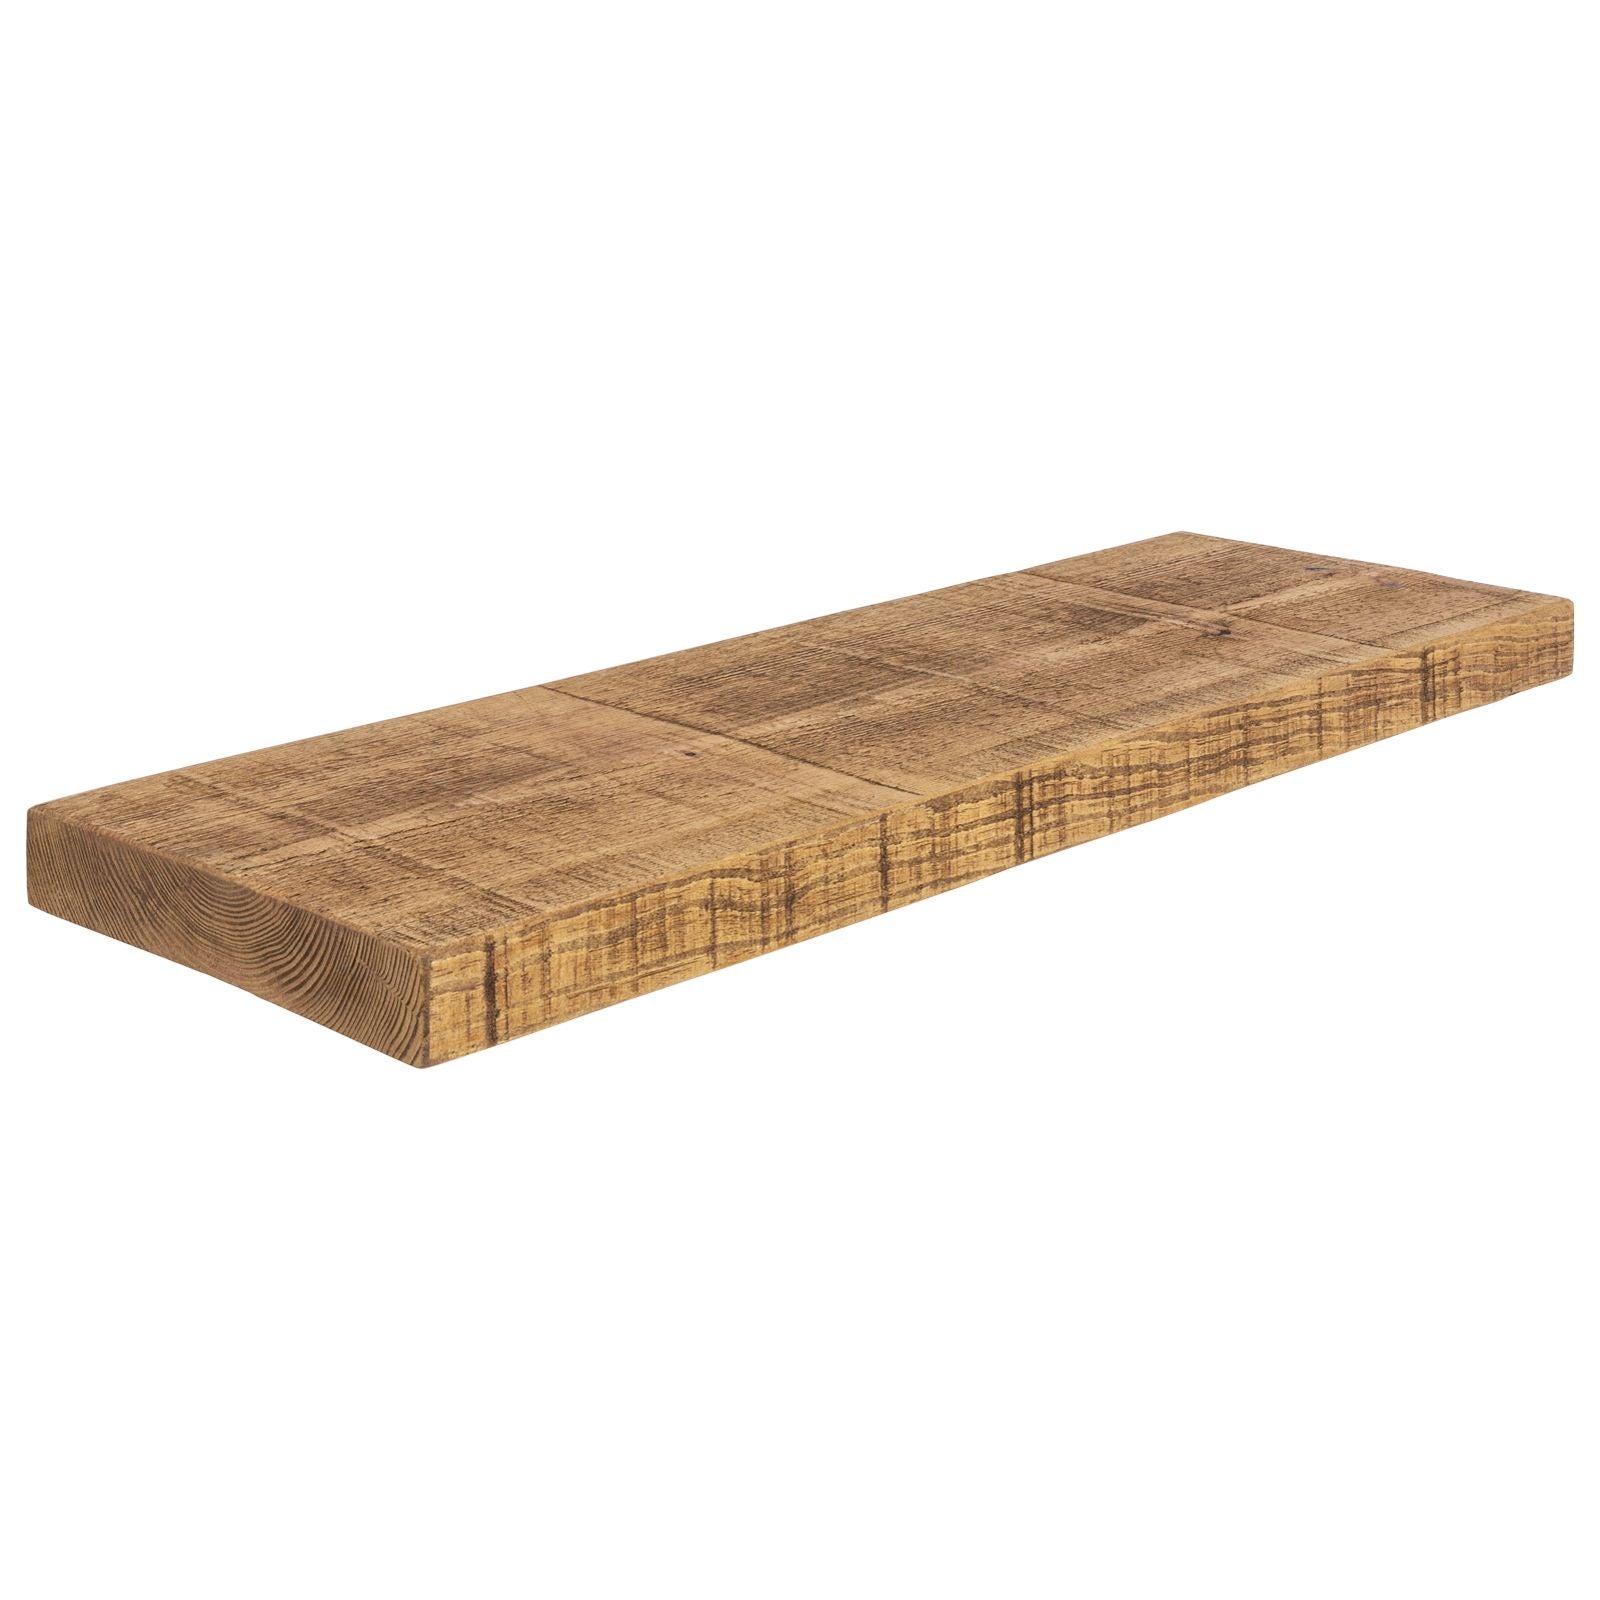 12x2 Rustic Floating Shelf - Outlet - Save 20%